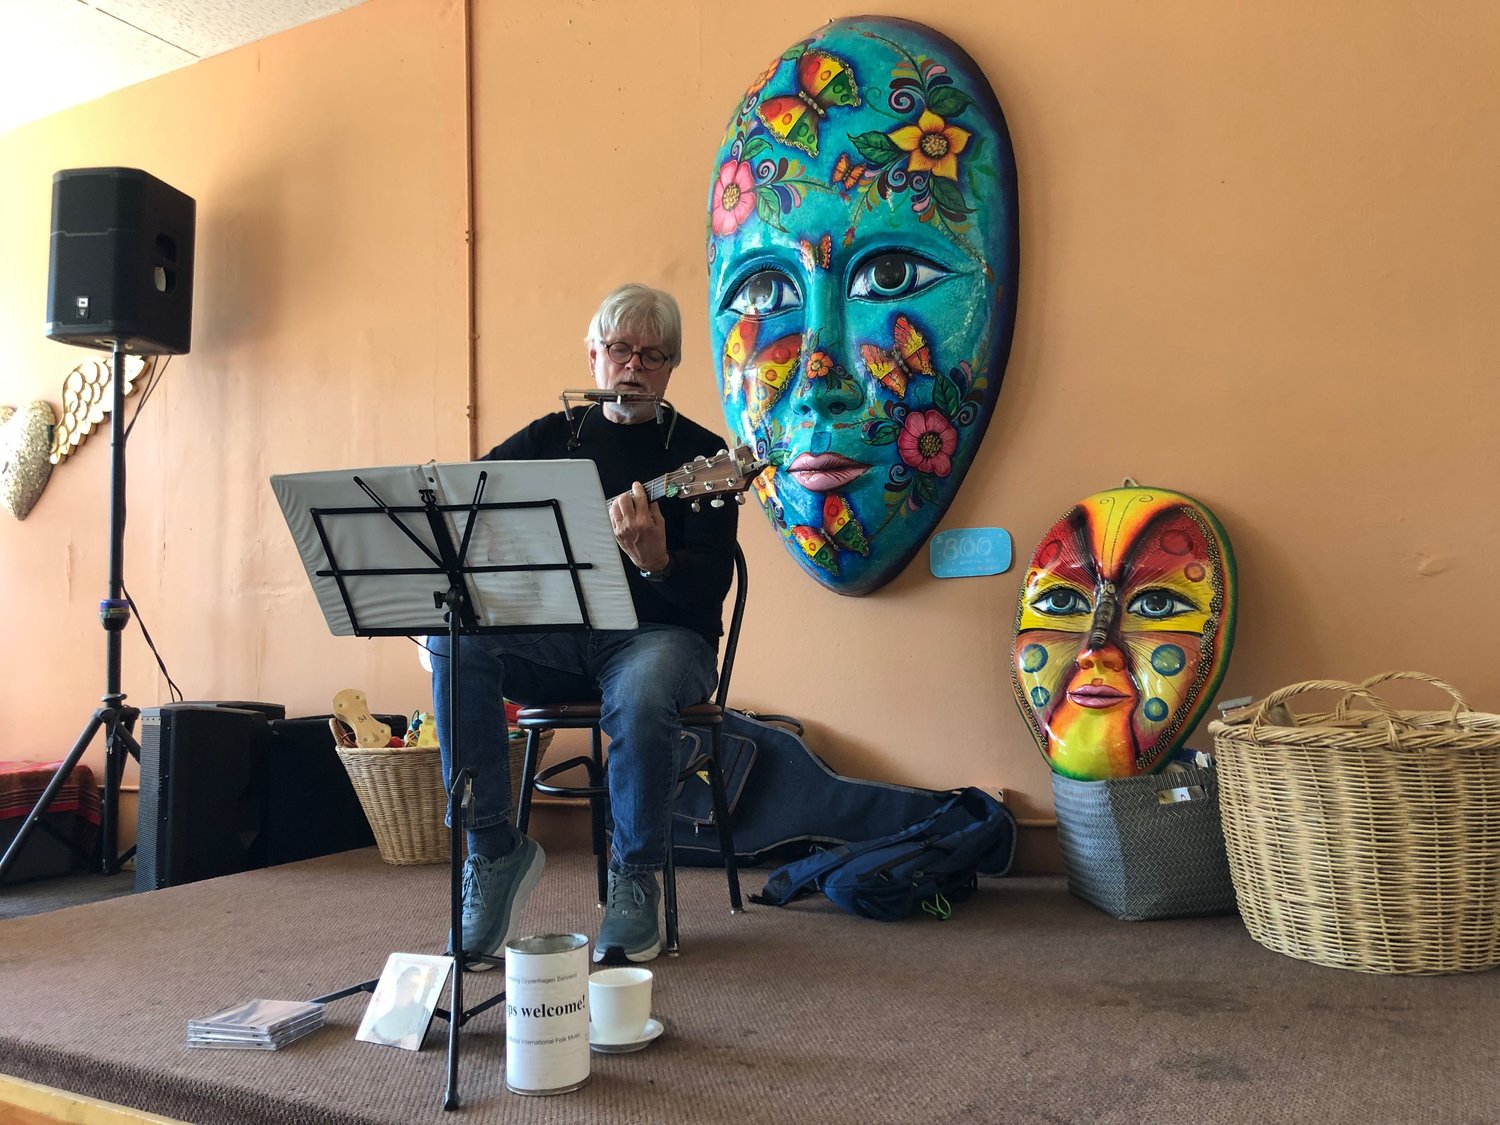 Singer-songwriter Fleming Oppenhagen Behrend performed at the grand re-opening of New Traditions Cafe on July 9, 2021.